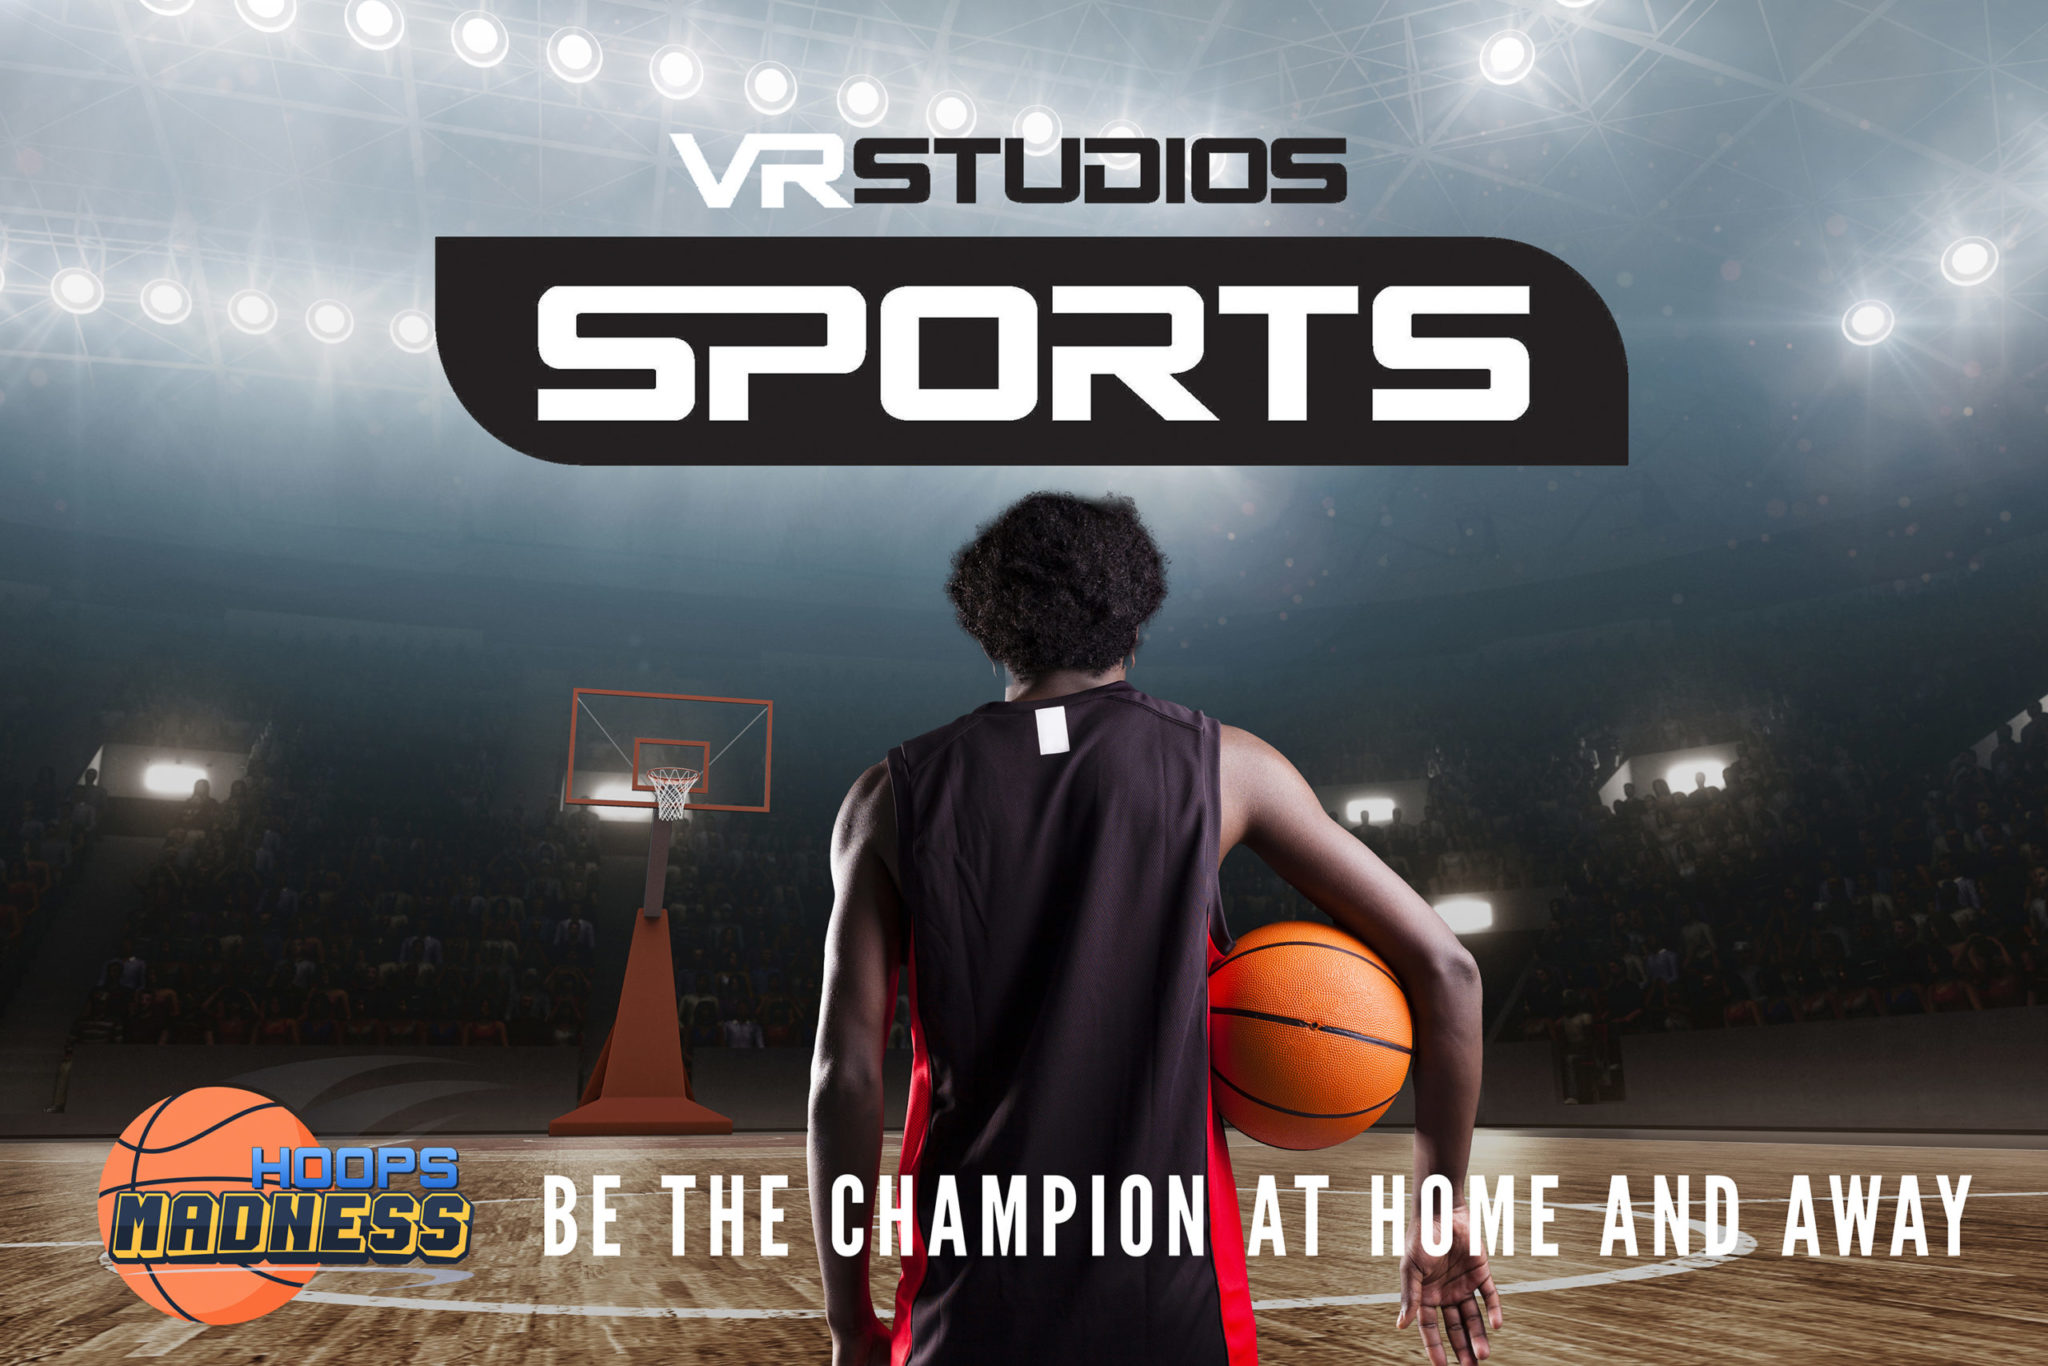 Vrstudios Launches Virtual Reality Sports Platform To Integrate Players At Home And Lbe Vr Gaming Experiences Auganix Org